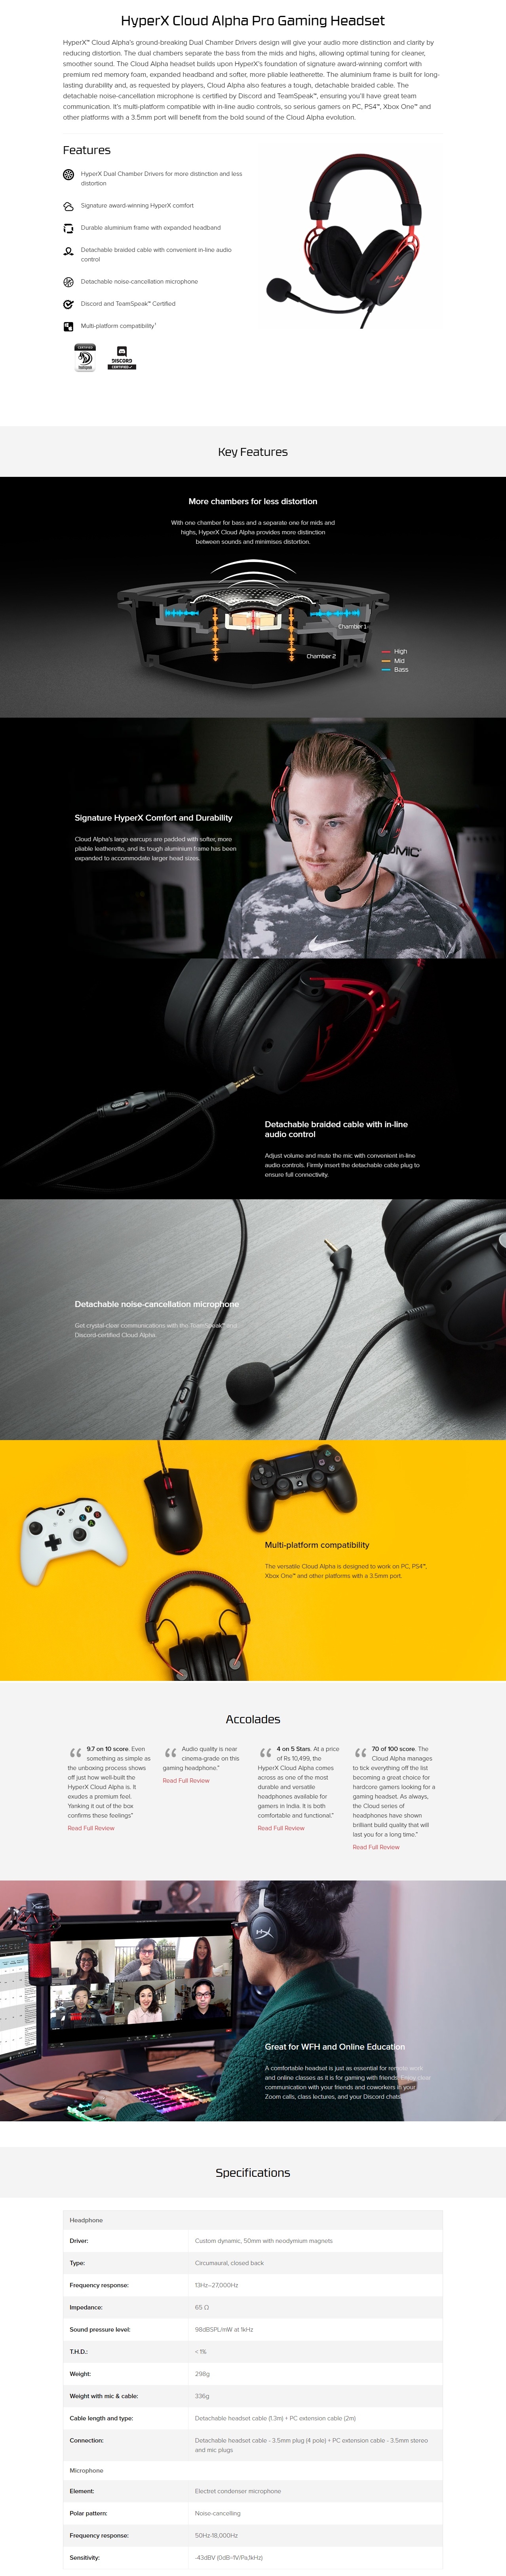 A large marketing image providing additional information about the product HyperX Cloud Alpha - Wired Gaming Headset - Additional alt info not provided